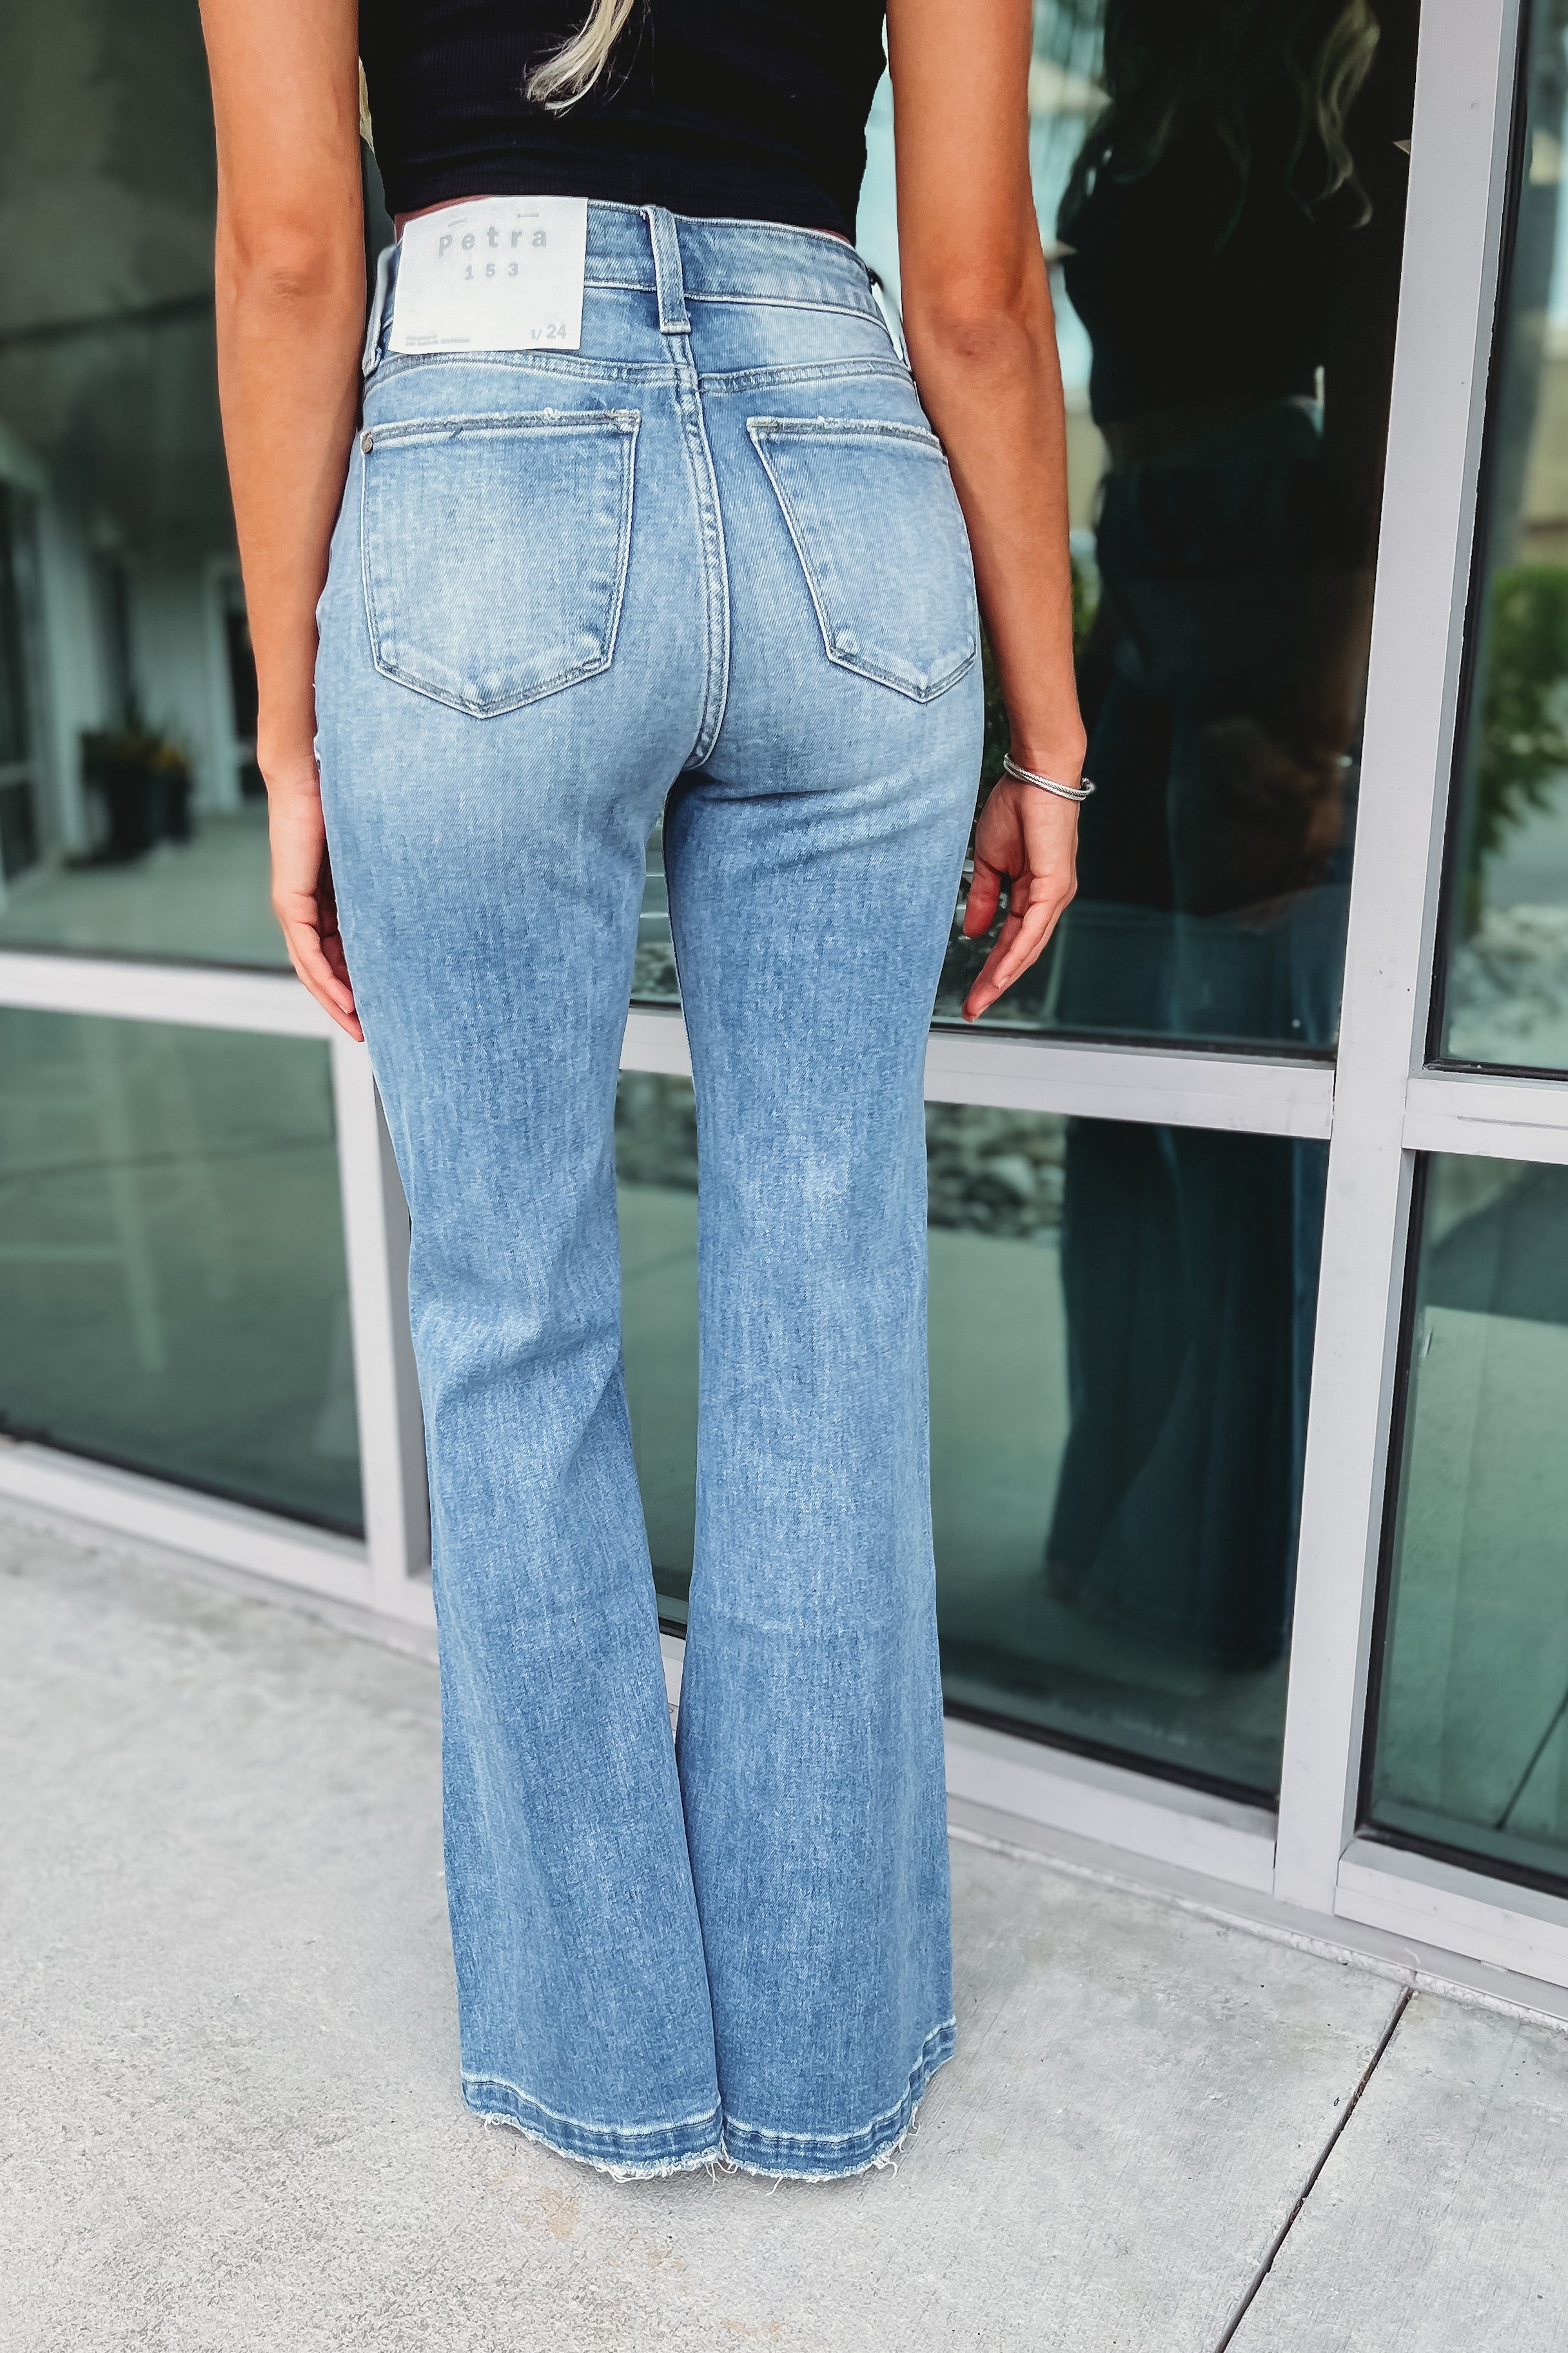 NEW Barely Worn Vintage Flares // light wash, high wasted, stretchy and fit  true to size 😍 Sizes available: 25, 26, 27, 28, 29, 30, 3